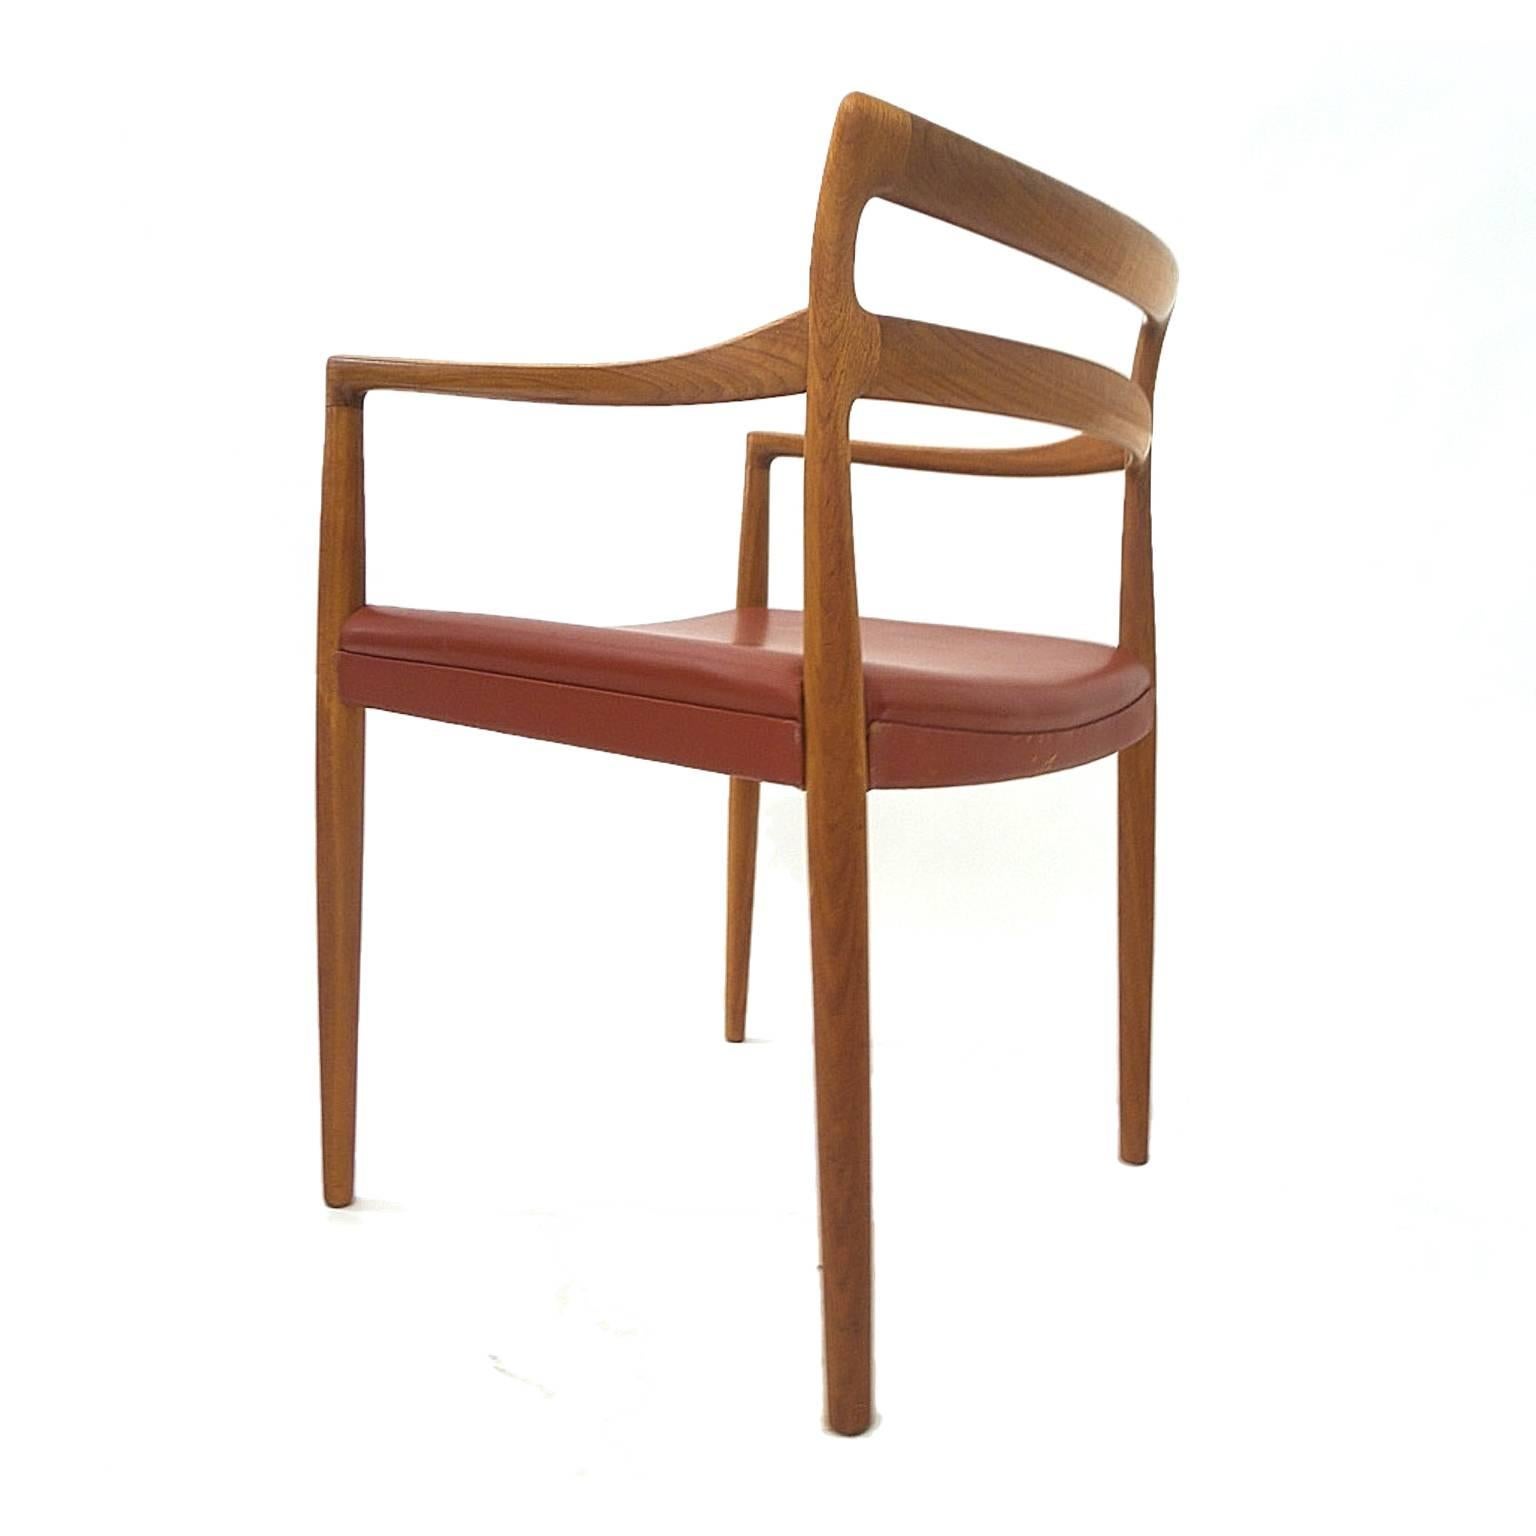 Fantastic set of six Danish modern teak dining chairs. Four side chairs and two armchairs. Sculptural teak frames with red leather seats.

Armchair is 21.25